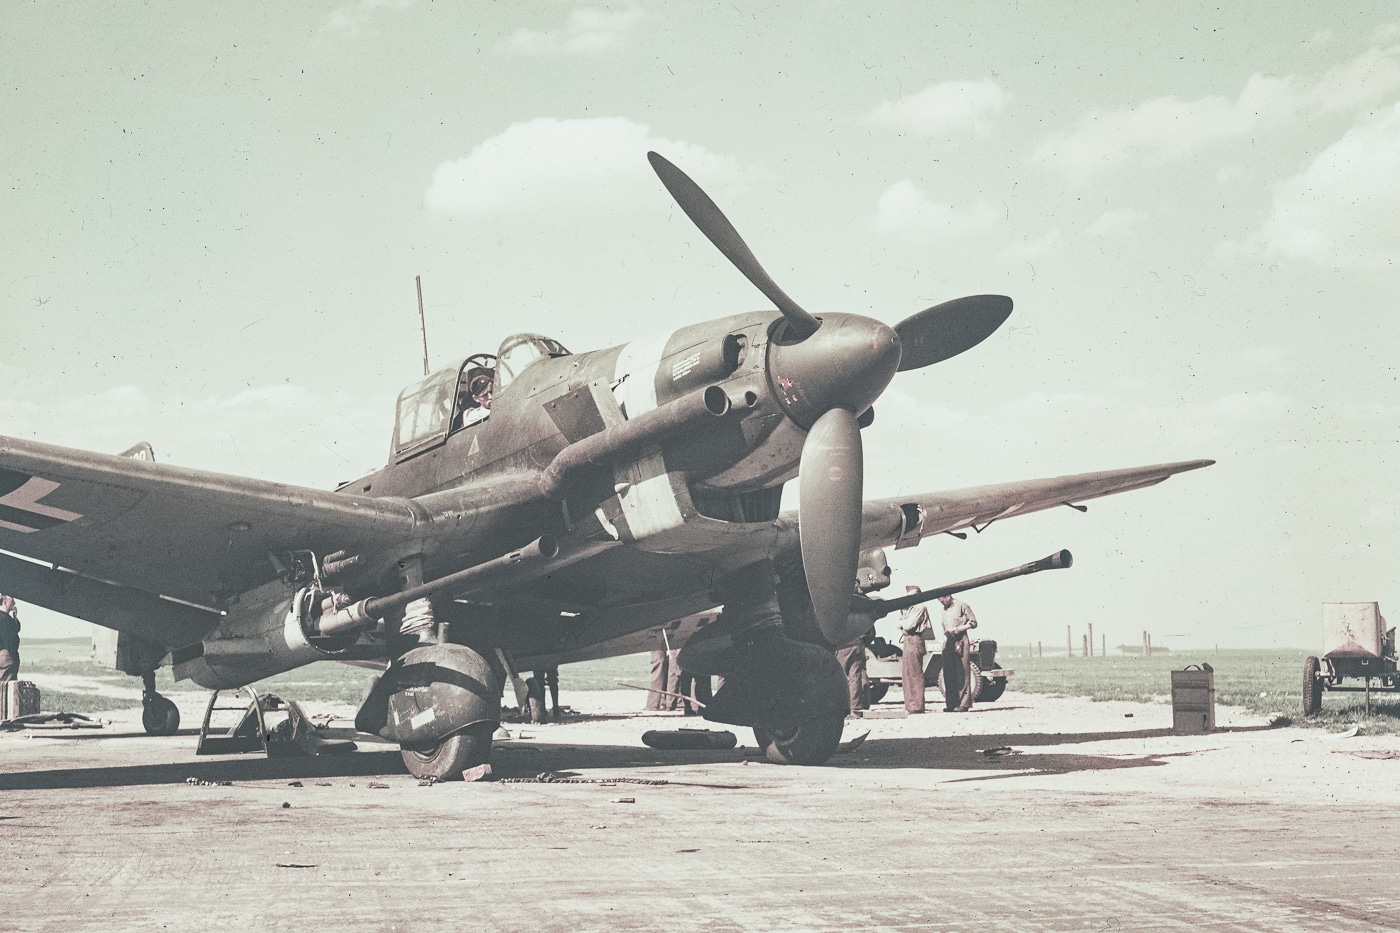 Shown in this digitial photograph is a Ju 87G Stuka with anti-tank guns. An anti-tank gun is a form of artillery designed to destroy tanks and other armored fighting vehicles, normally from a static defensive position. However, these were attached as gun pods to the Luftwaffe plane to destroy Allied tanks and armored vehicles.